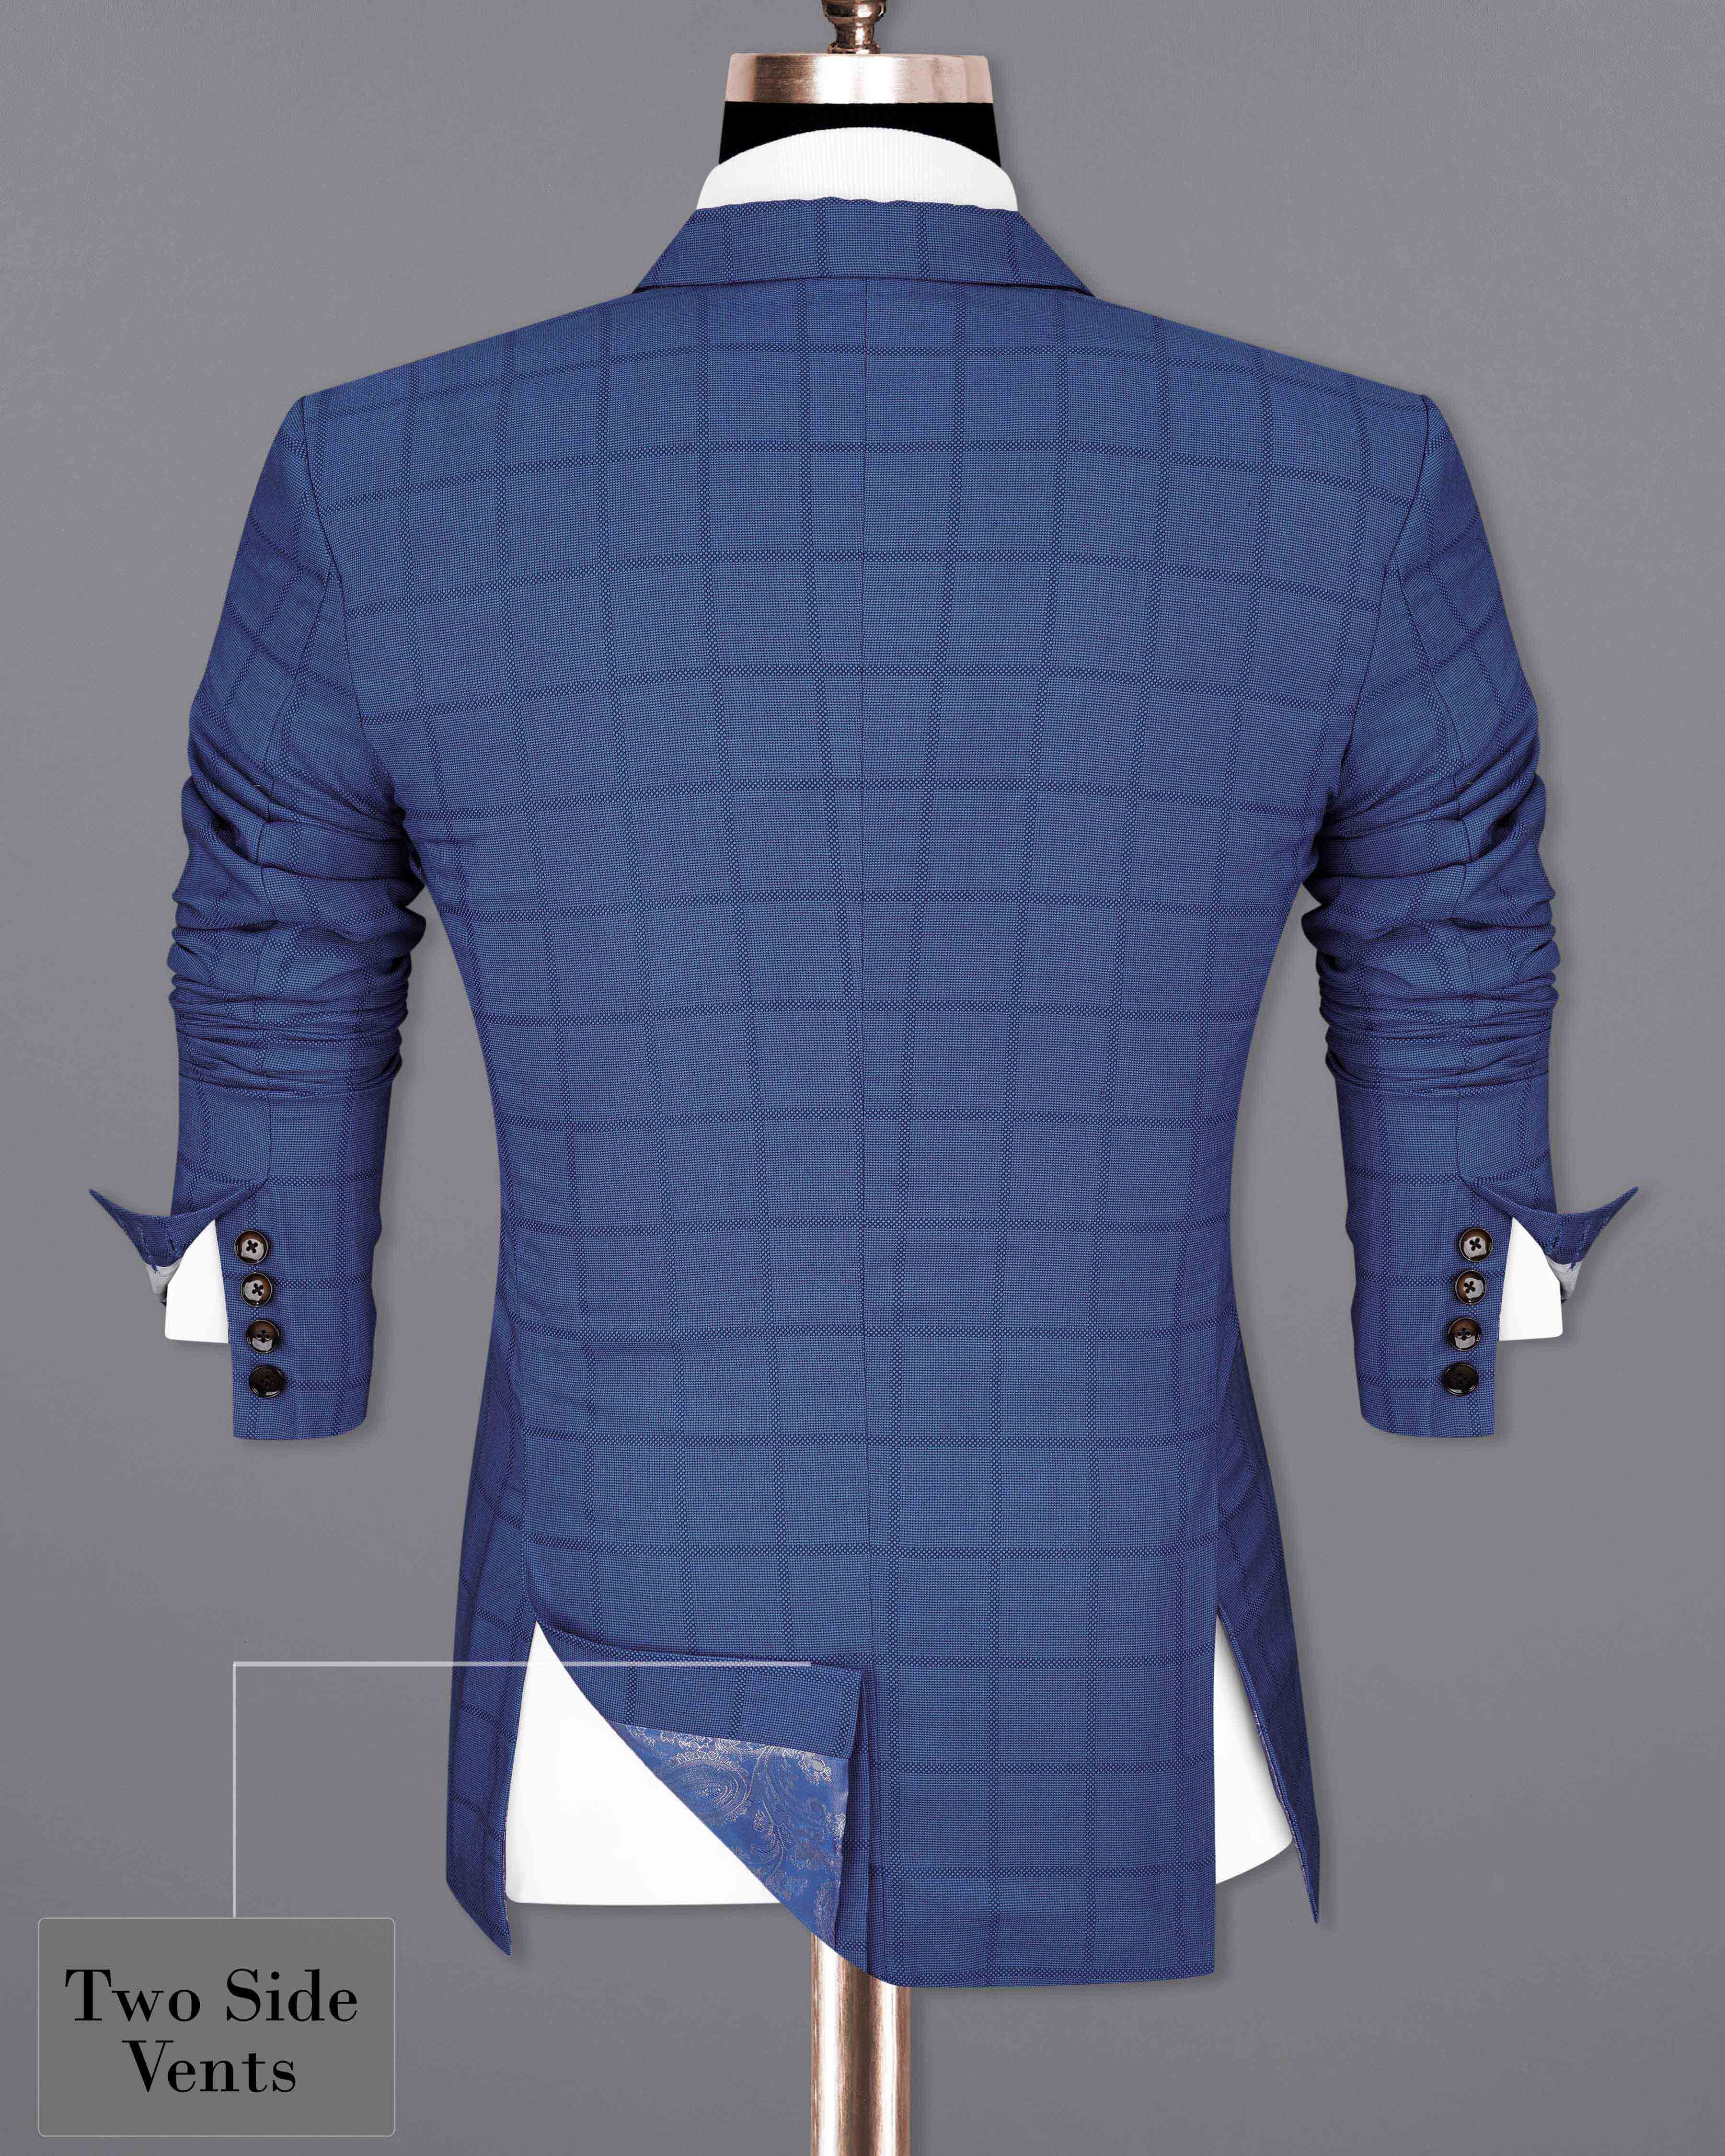 Chambray Blue Windowpane Double Breasted Blazer BL2048-DB-36, BL2048-DB-38, BL2048-DB-40, BL2048-DB-42, BL2048-DB-44, BL2048-DB-46, BL2048-DB-48, BL2048-DB-50, BL2048-DB-52, BL2048-DB-54, BL2048-DB-56, BL2048-DB-58, BL2048-DB-60